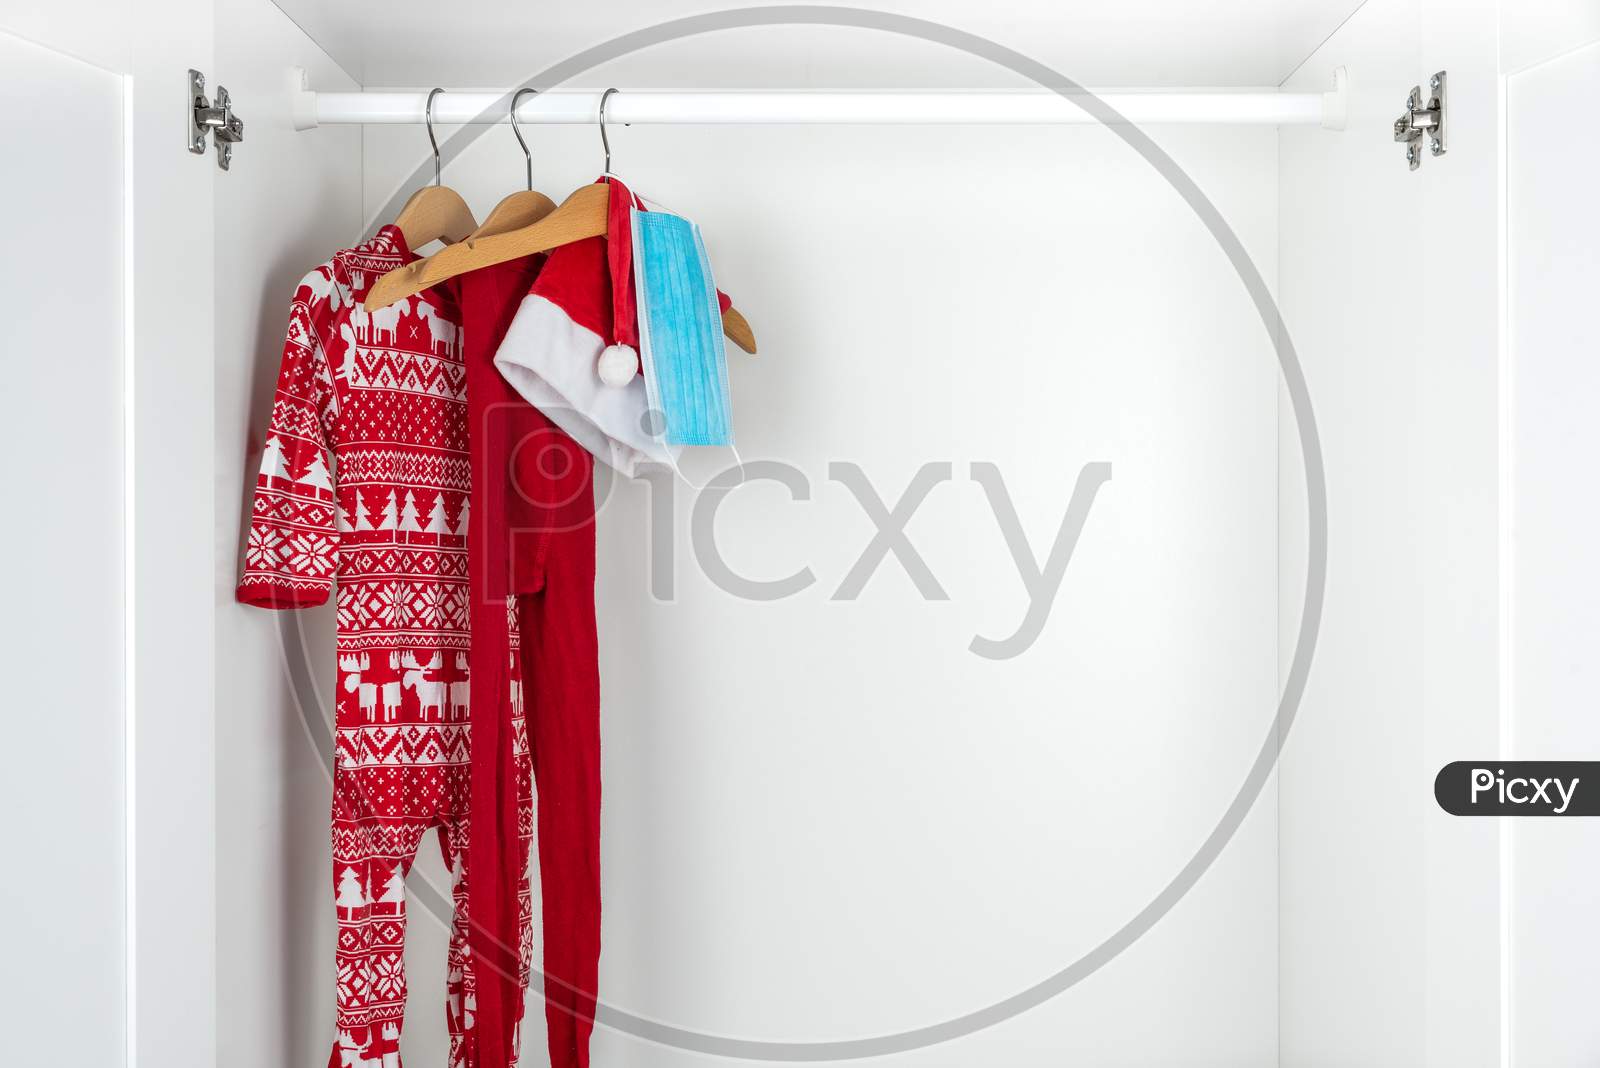 White And Red Christmas Pajamas, Hat, Tights And Face Mask Hanging On Wooden Hangers Inside A White Closet. Holidays During Coronavirus Pandemic.